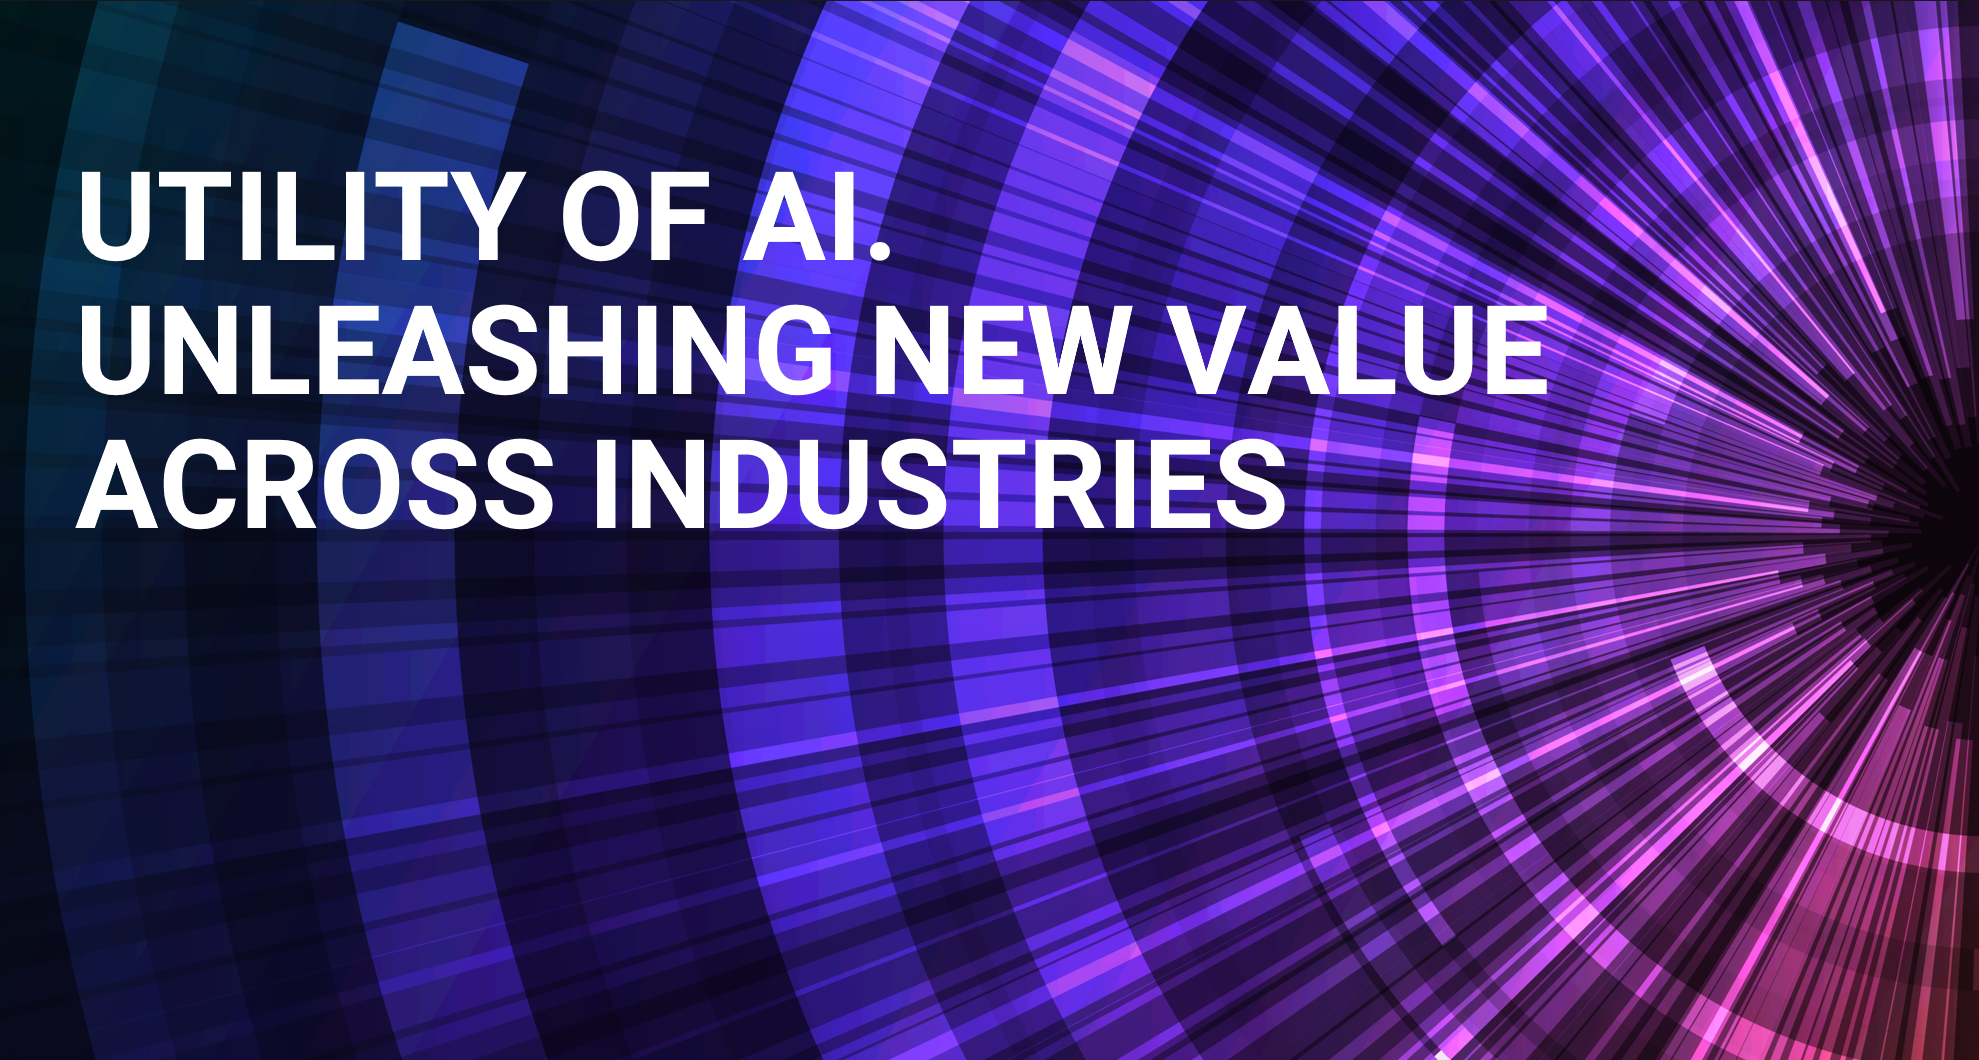 What Matters in AI series: Utility of AI - Unleashing new value across industries